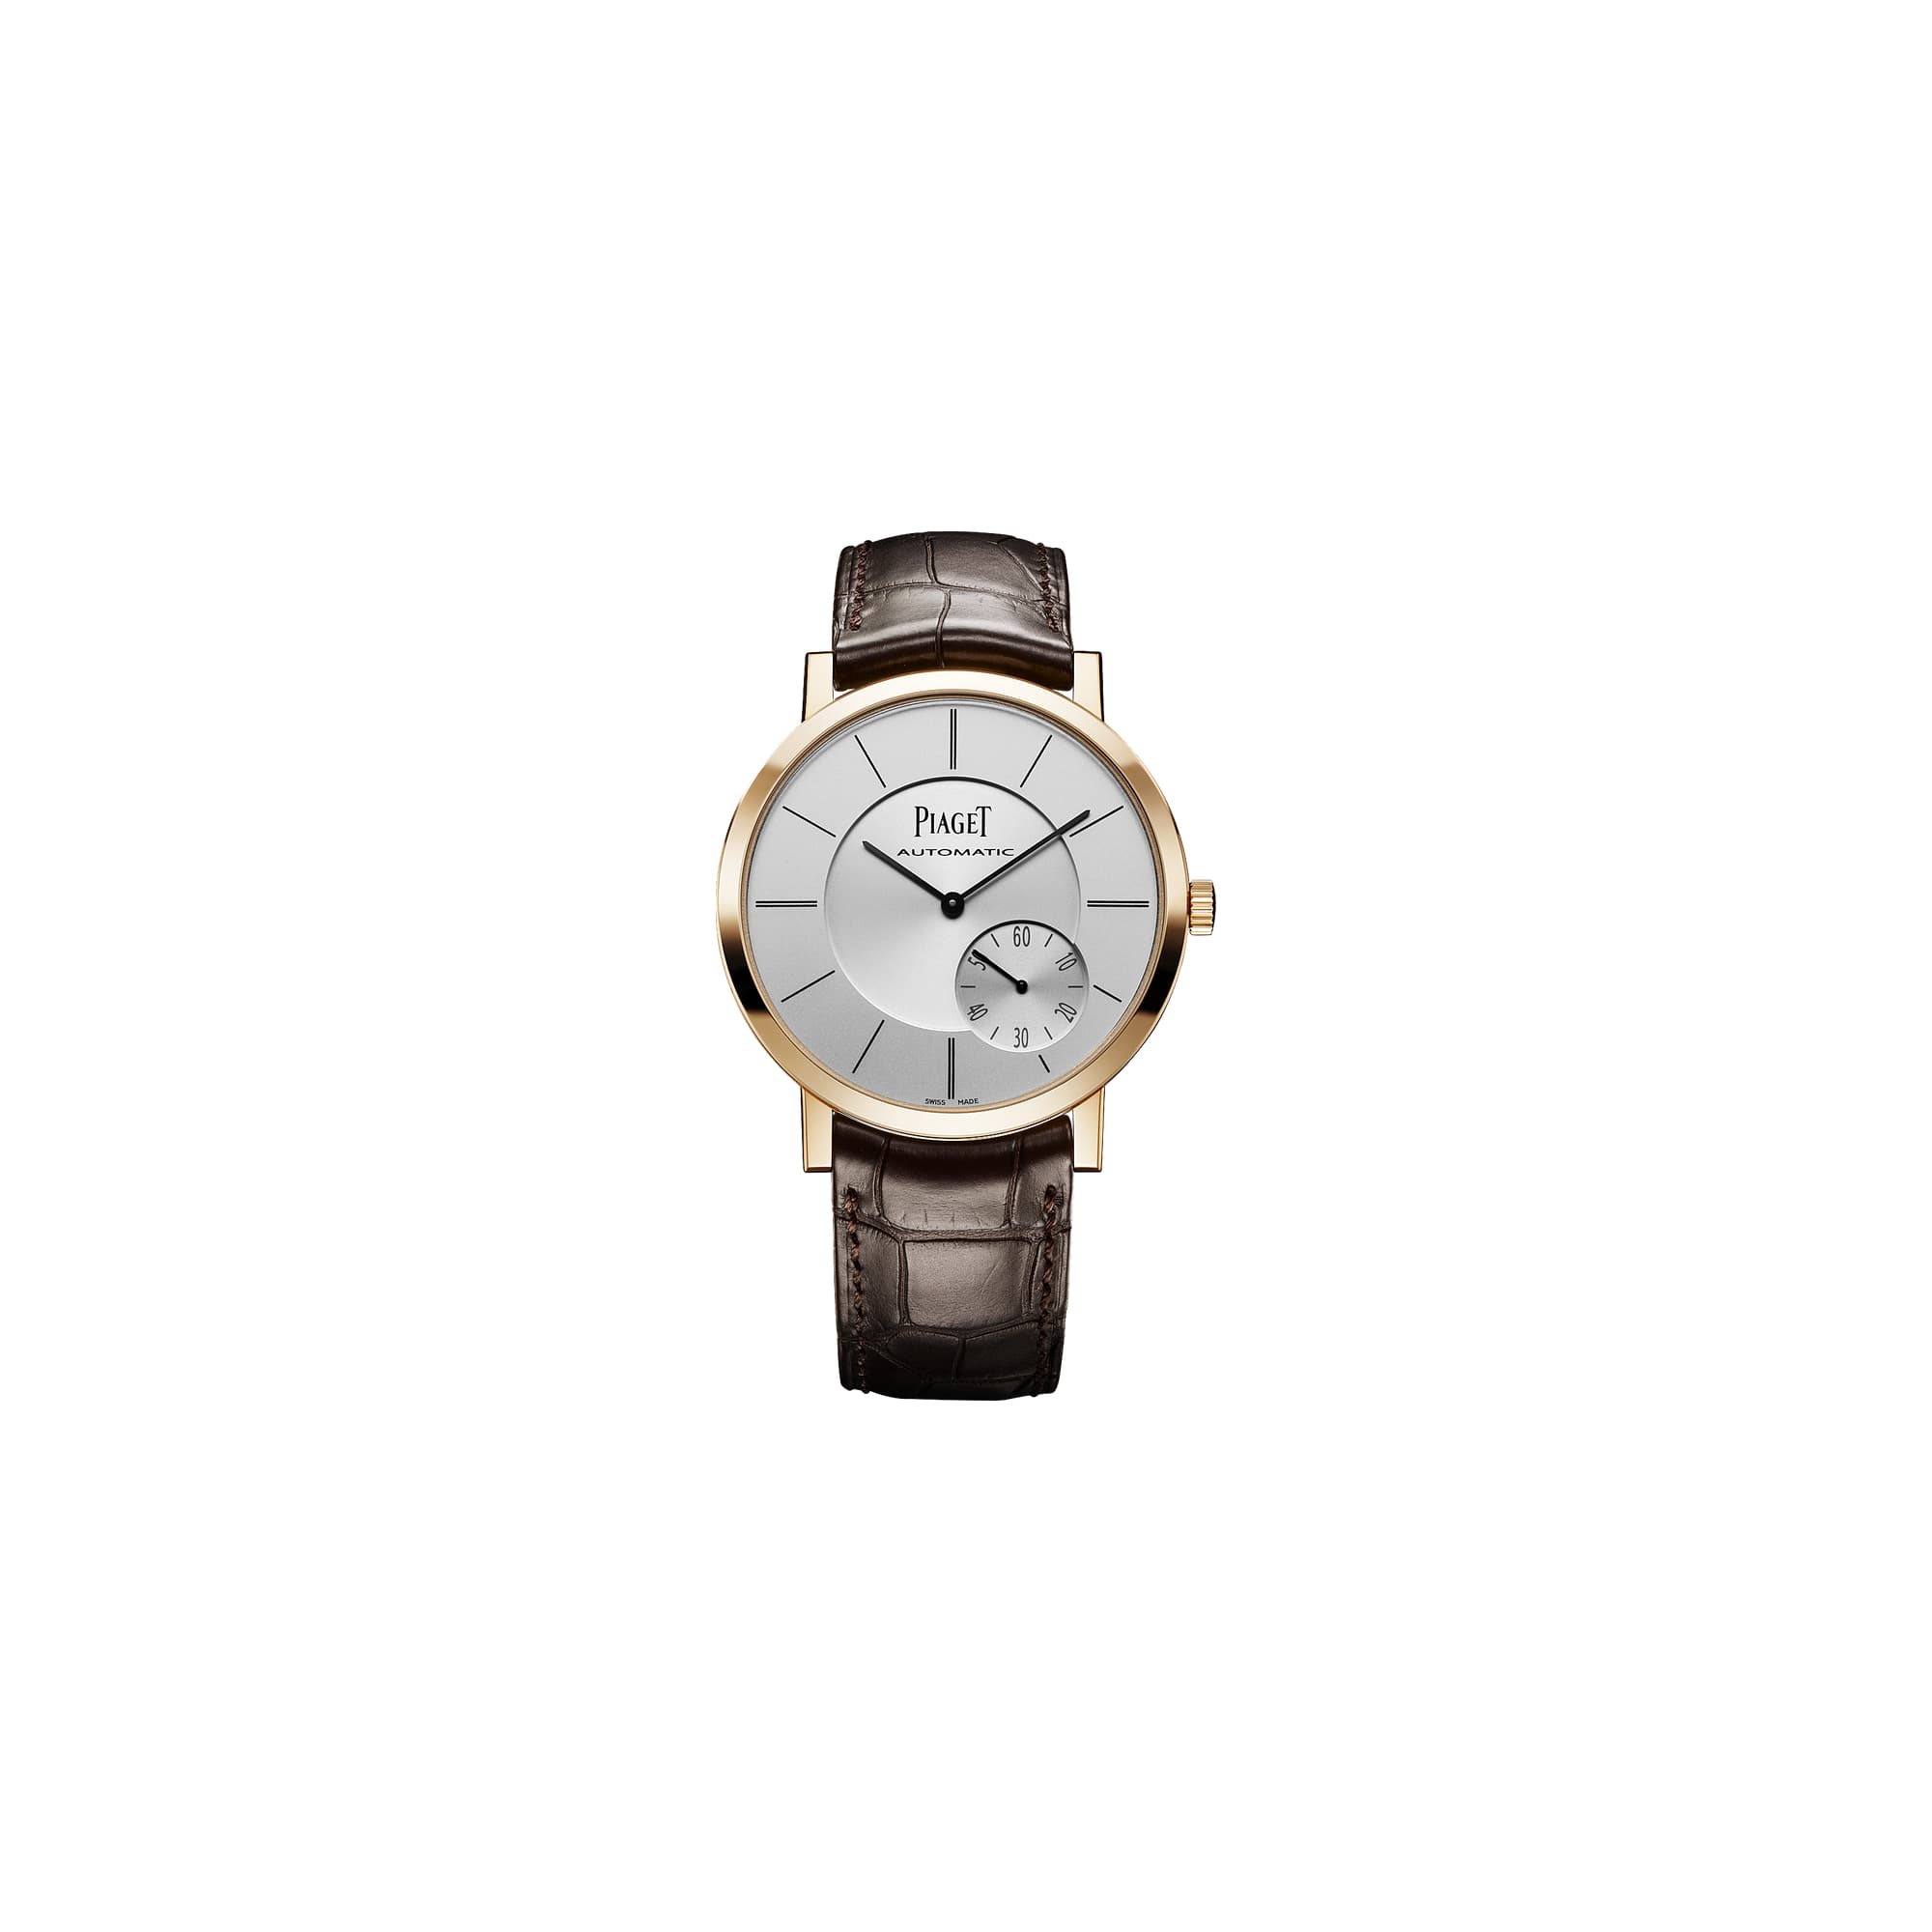 Automatic watch in rose gold - Piaget Men’s Luxury Watch G0A35131